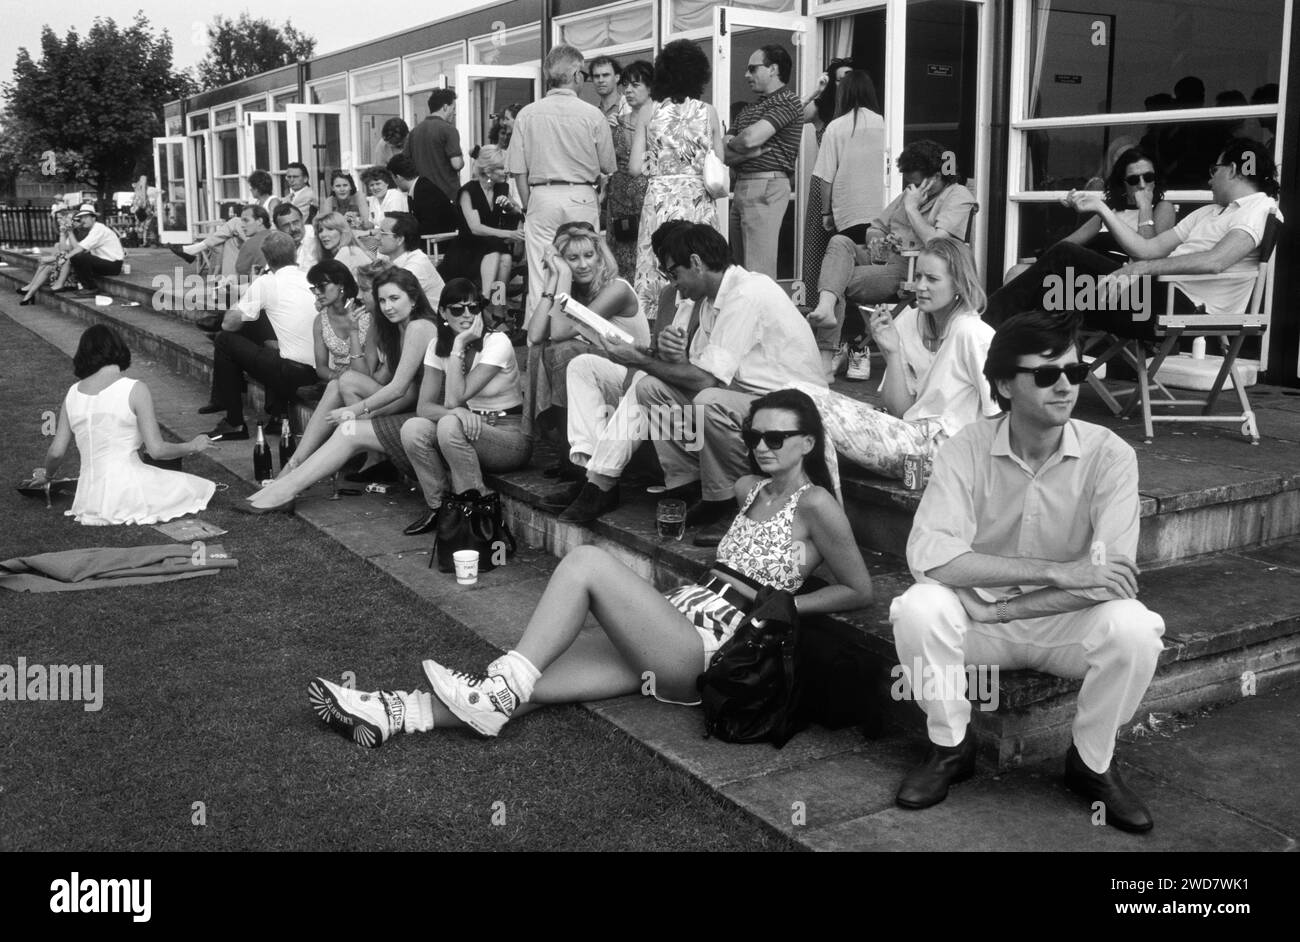 1980s UK fashionable wealthy smart people polo club groupies at Guards Polo Club.Windsor Great Park Egham Surrey. England Circa 1985 HOMER SYKES Stock Photo